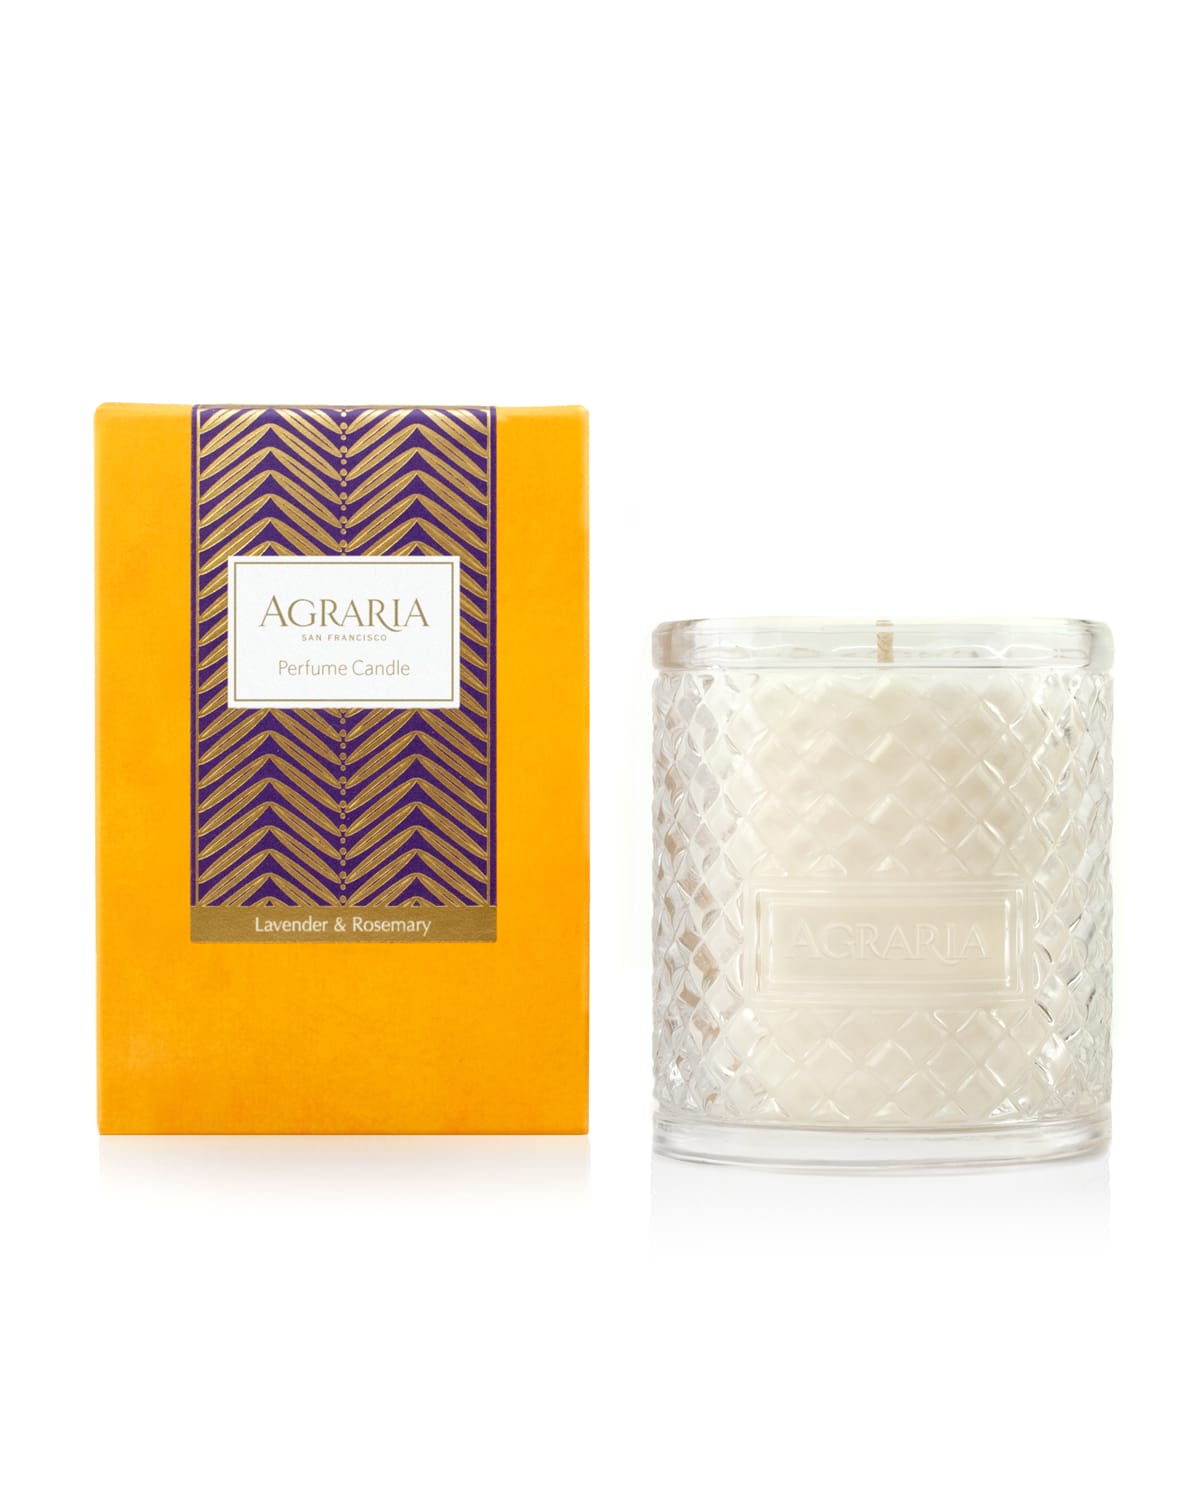 Agraria Lavender & Rosemary Woven Crystal Perfume Candle, 7 oz.